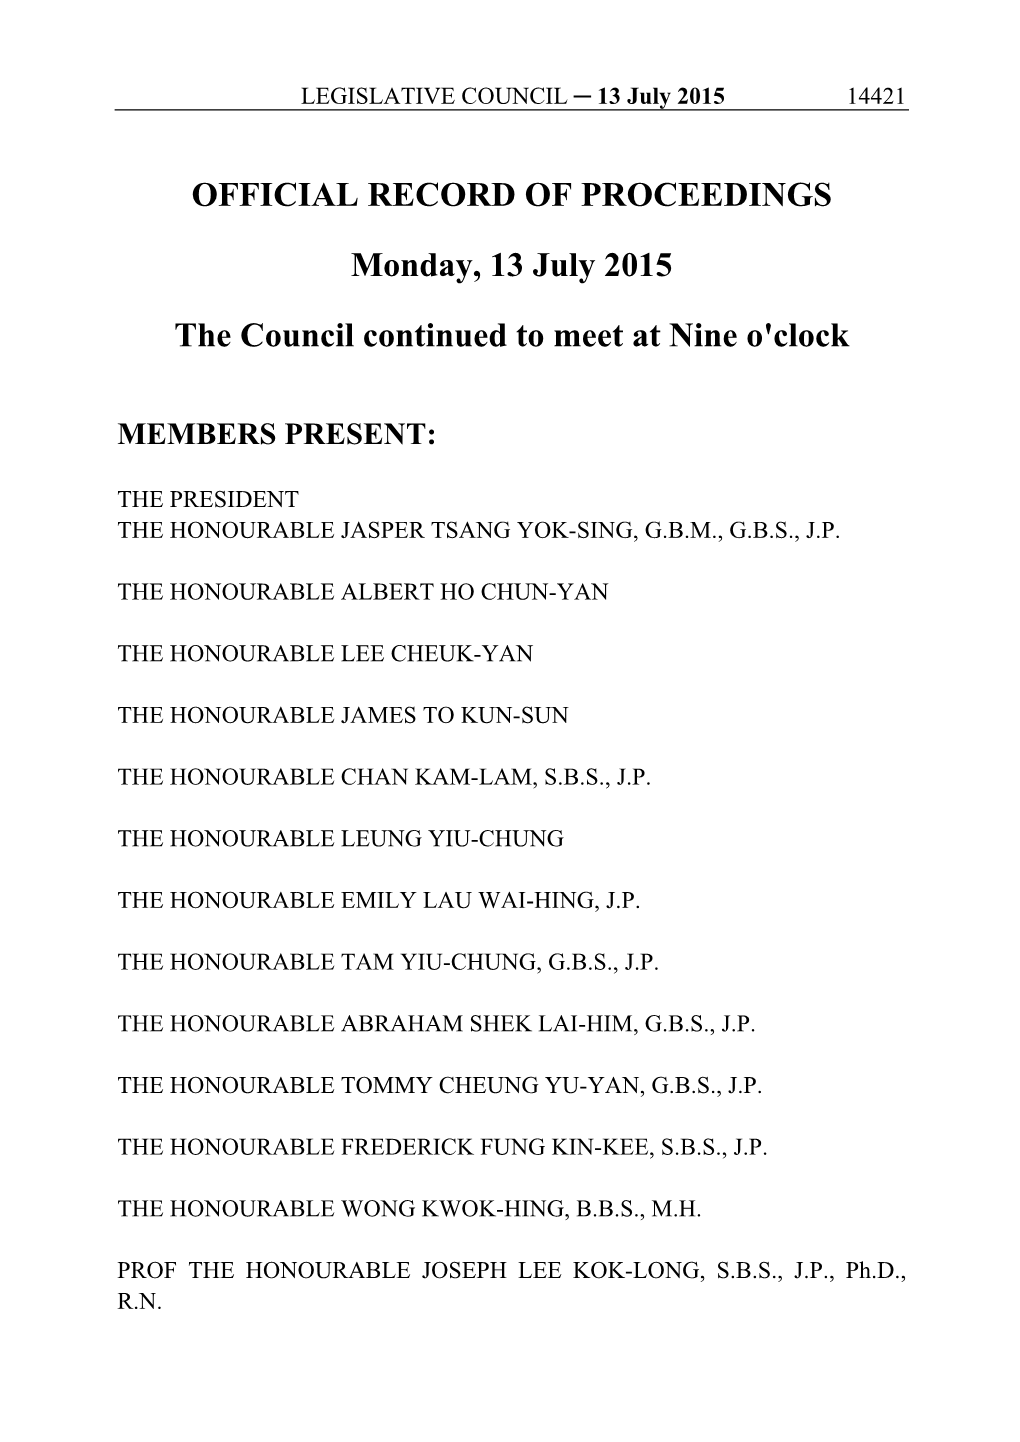 OFFICIAL RECORD of PROCEEDINGS Monday, 13 July 2015 the Council Continued to Meet at Nine O'clock